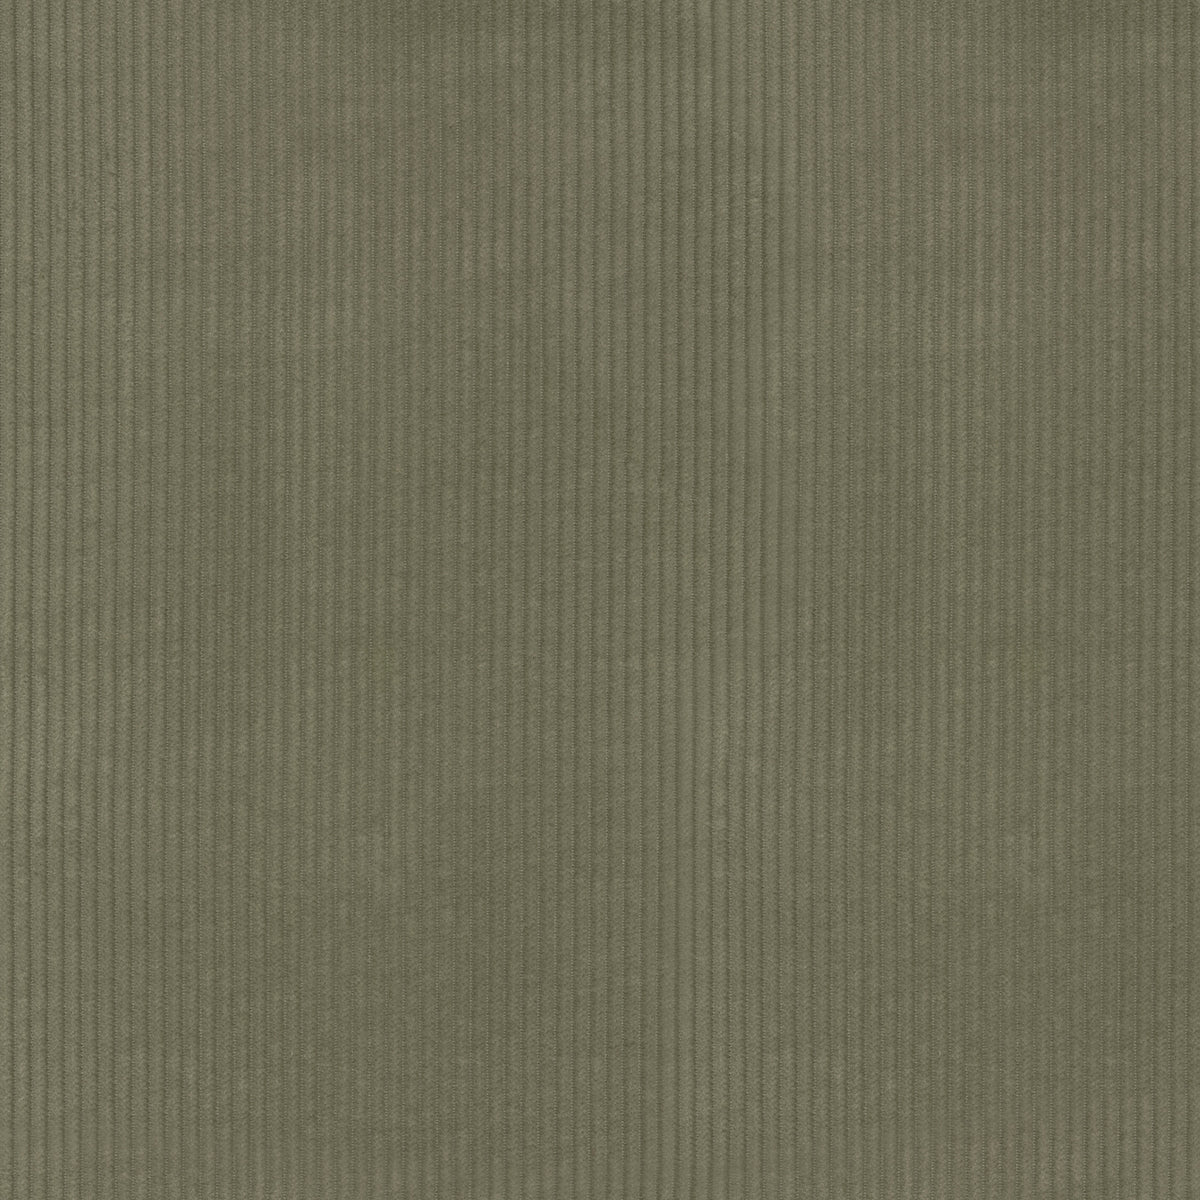 P/K Lifestyles Wales - Herbal 412028 Upholstery Fabric